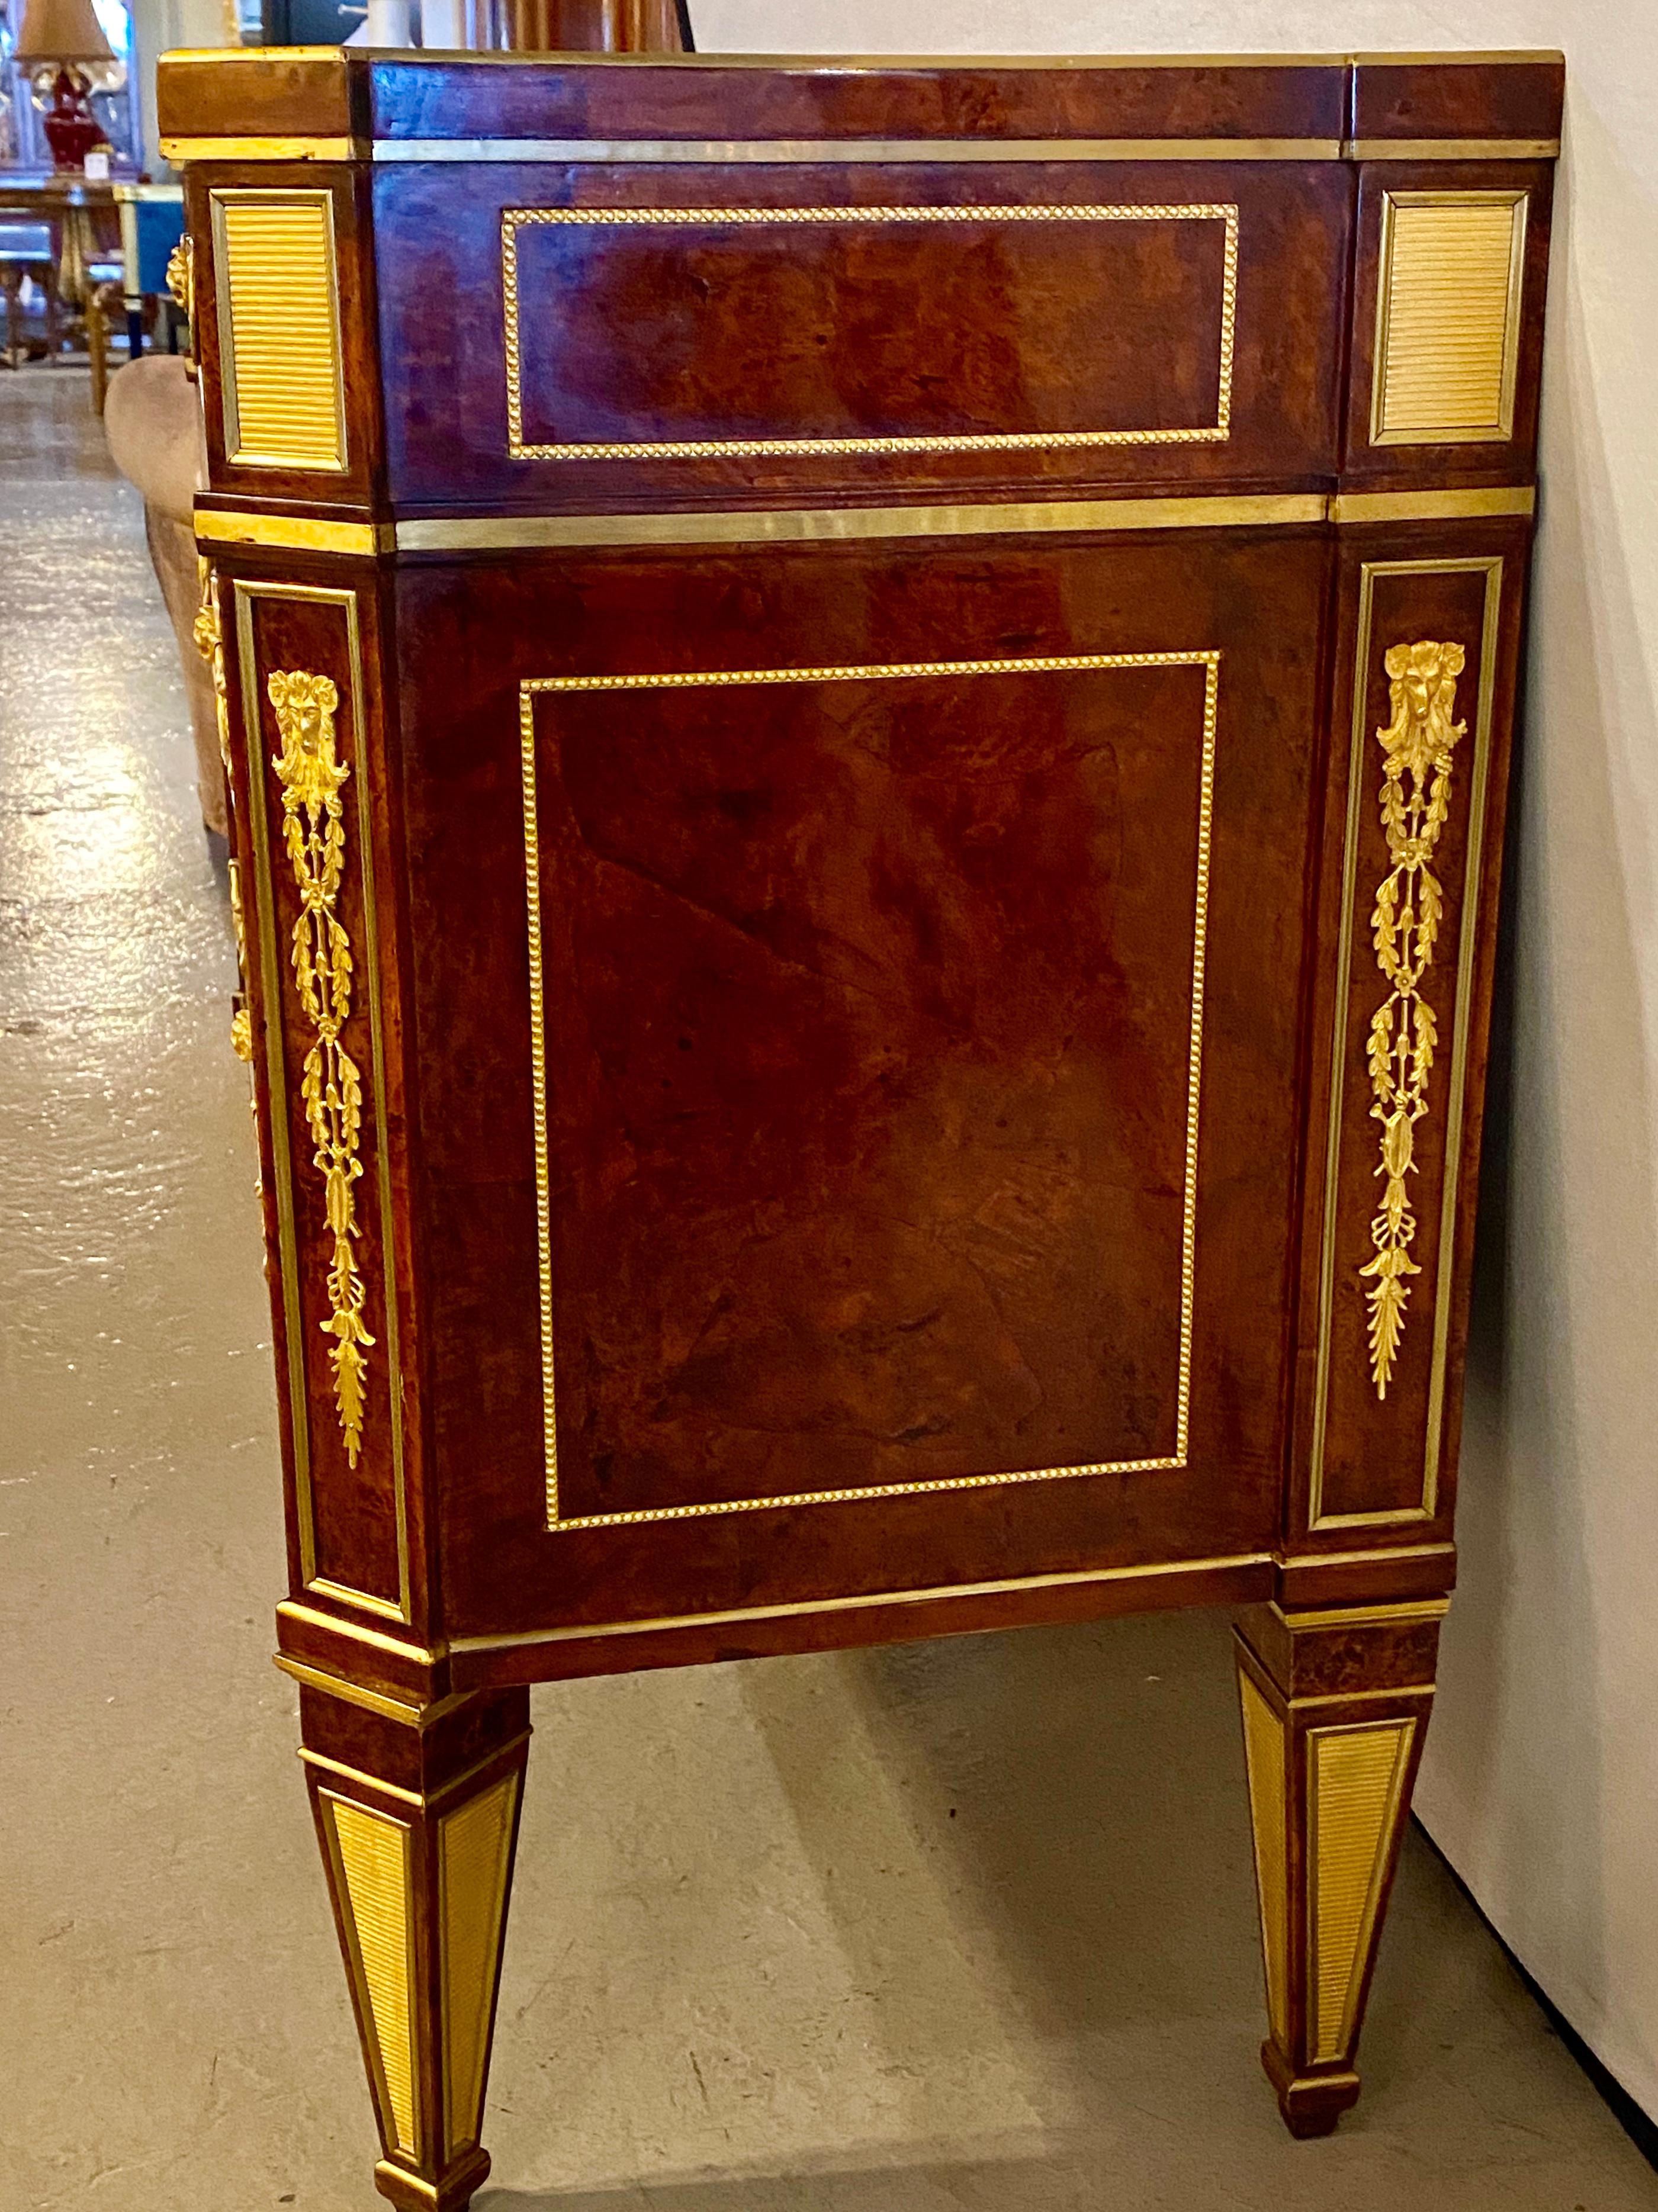 Neoclassical, Rare Commodes, Tortoise Shell Veneer, Bronze, Baltic States, 1880s For Sale 3